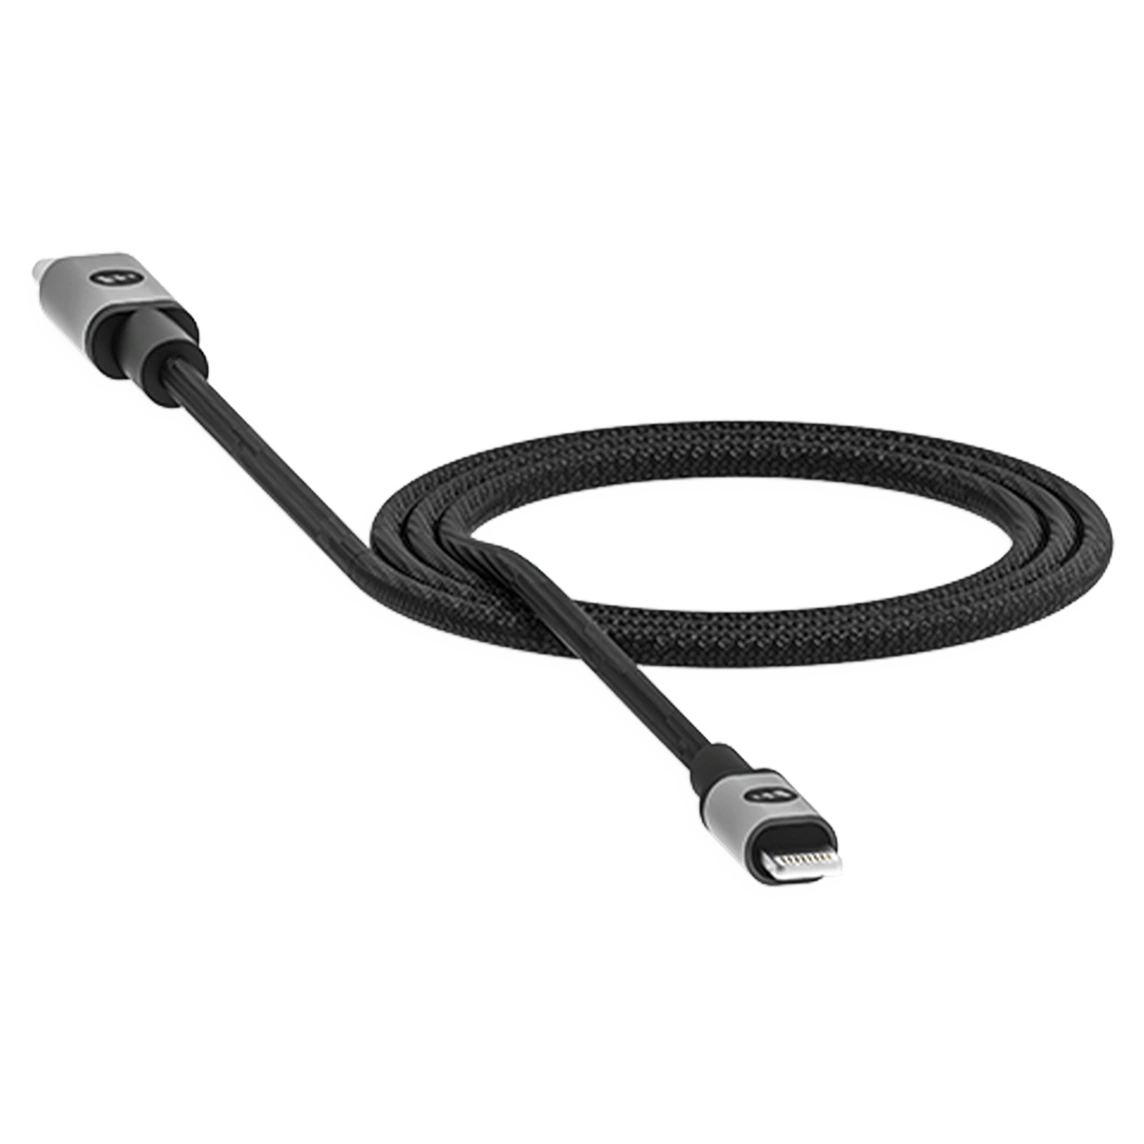 mophie-usb-c-to-lightning-cable-1-8m